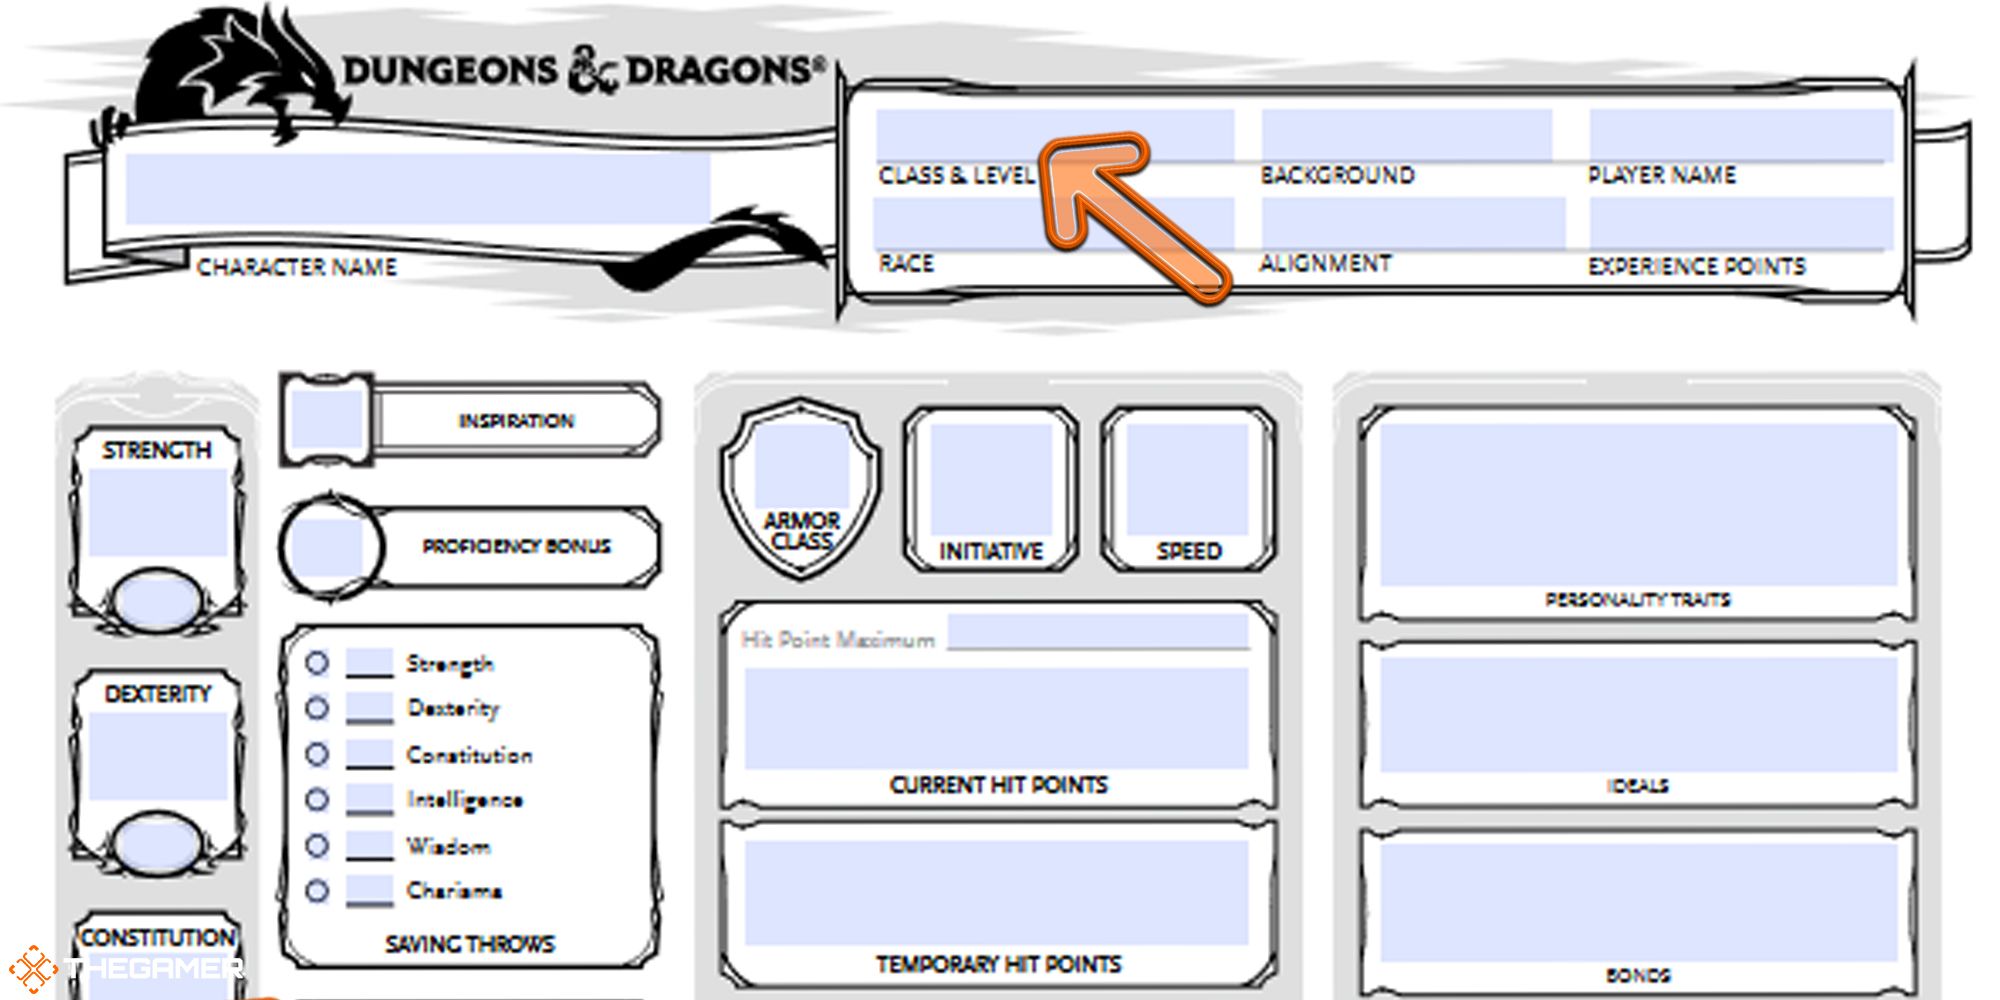 Dungeons and Dragons - character sheet, class